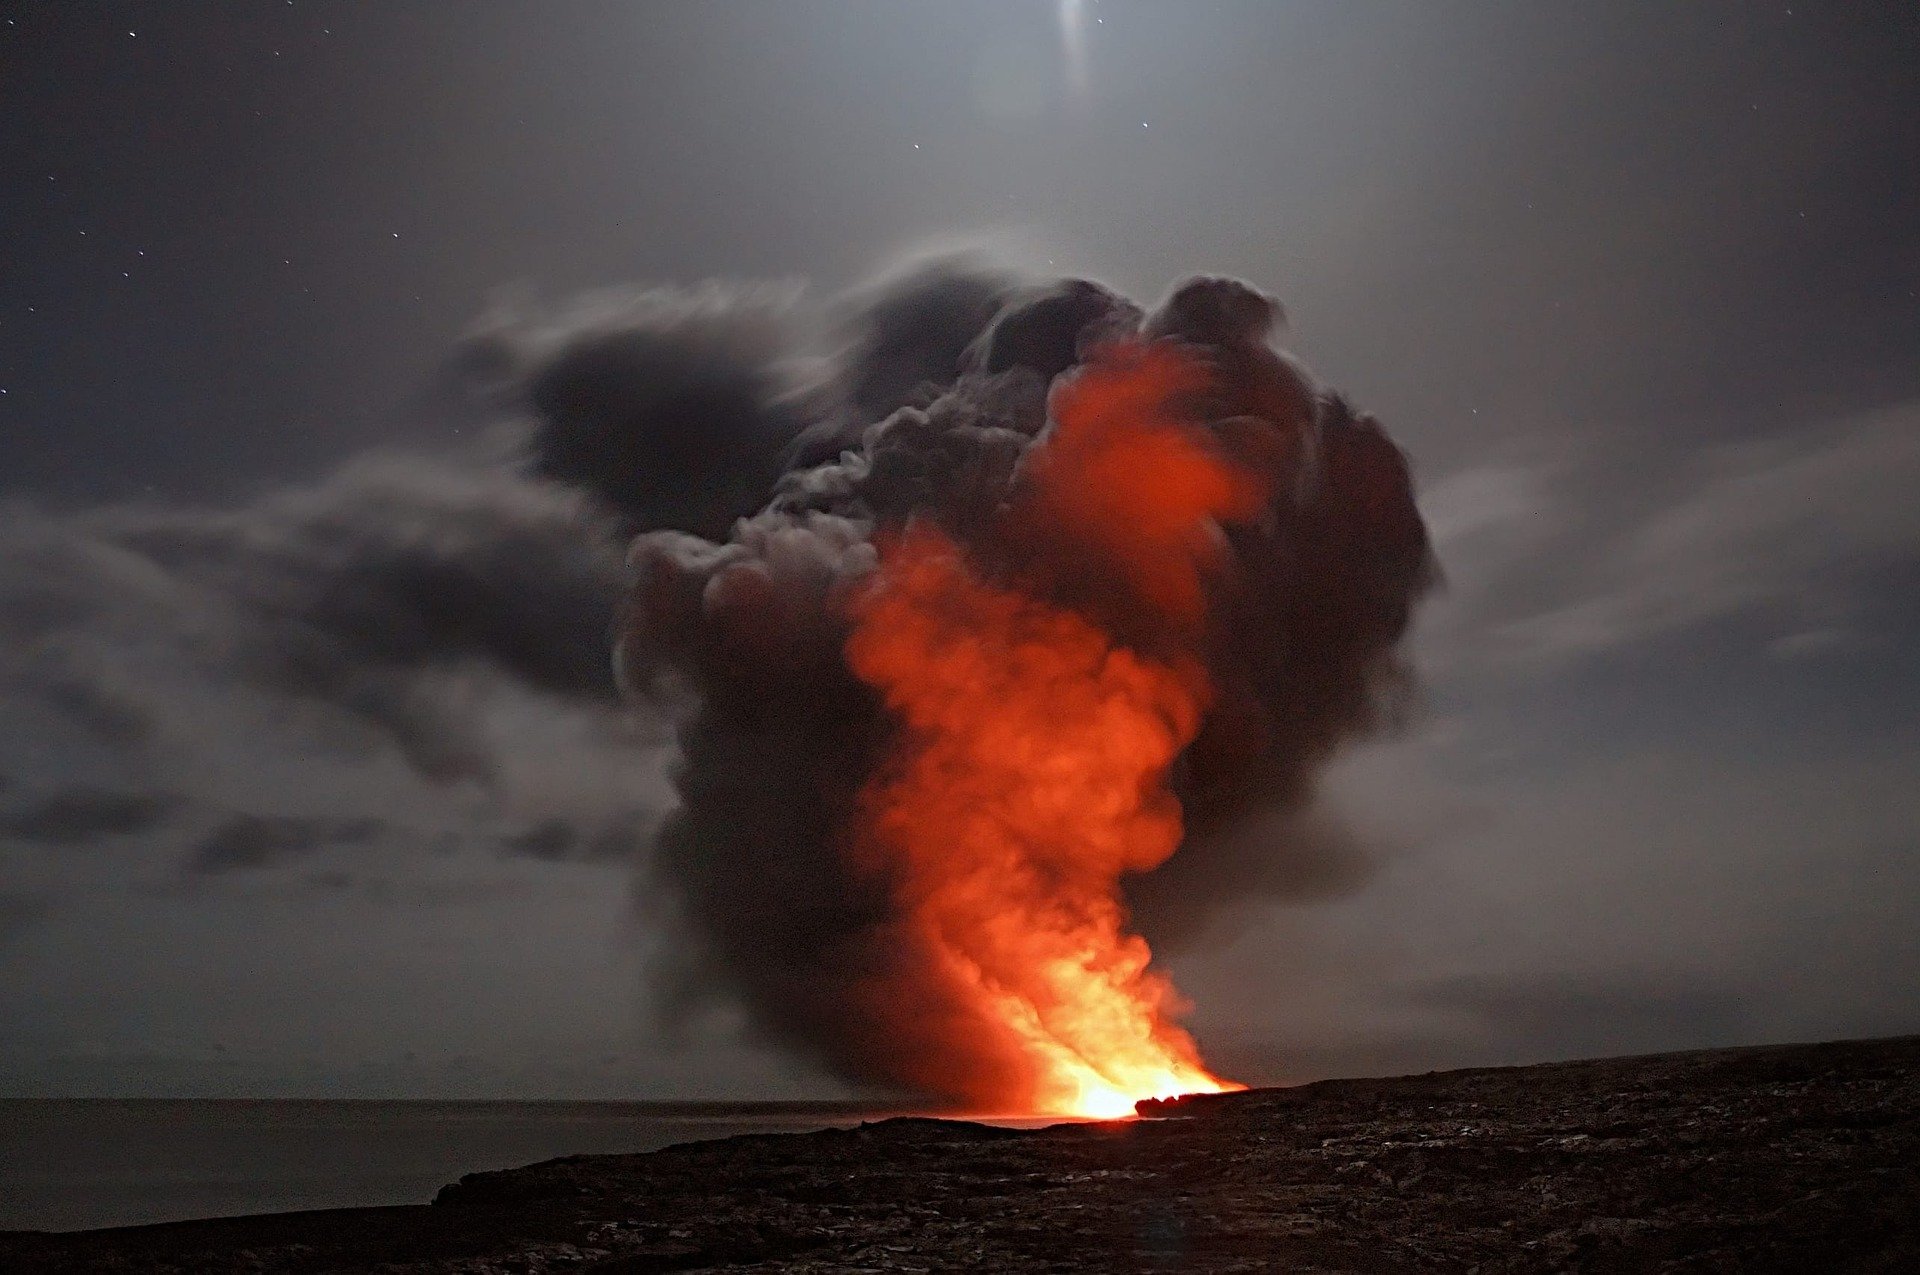 A cloud of smoke, fire, and ash below from a Hawai'i volcano | Photo: Pixabay/Adrian Malec